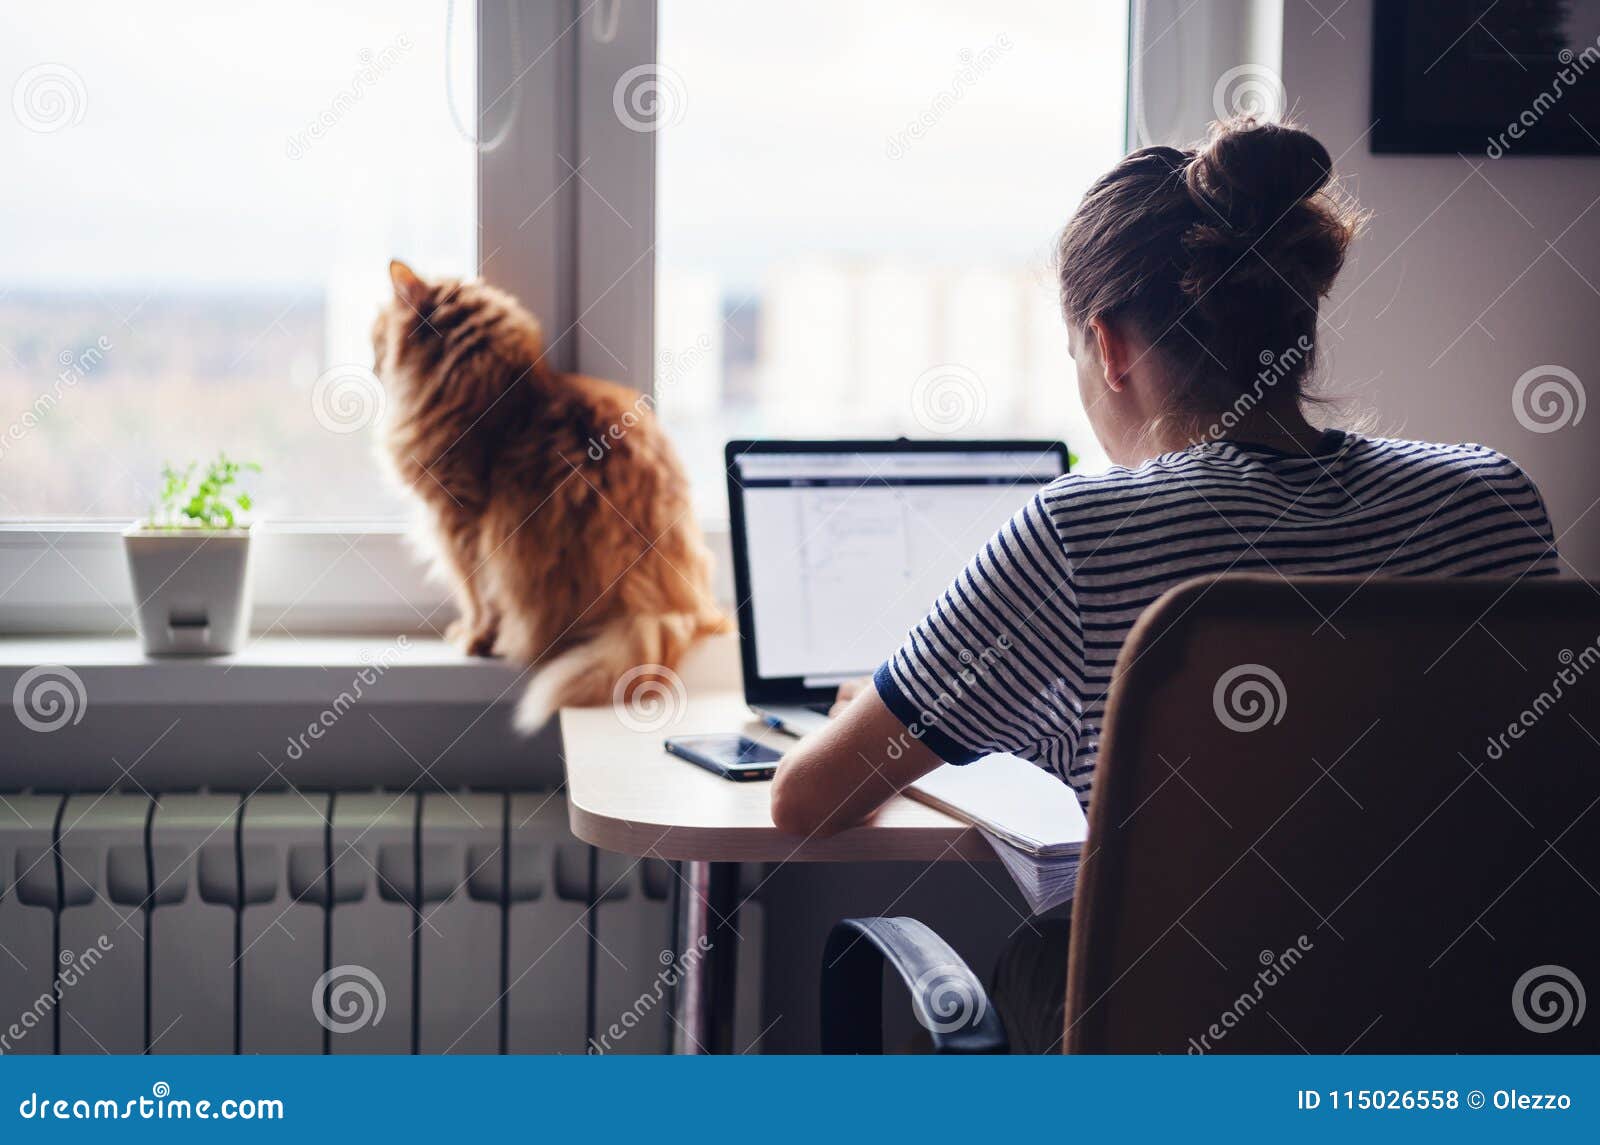 girl student freelancer working at home on a task, the cat is si